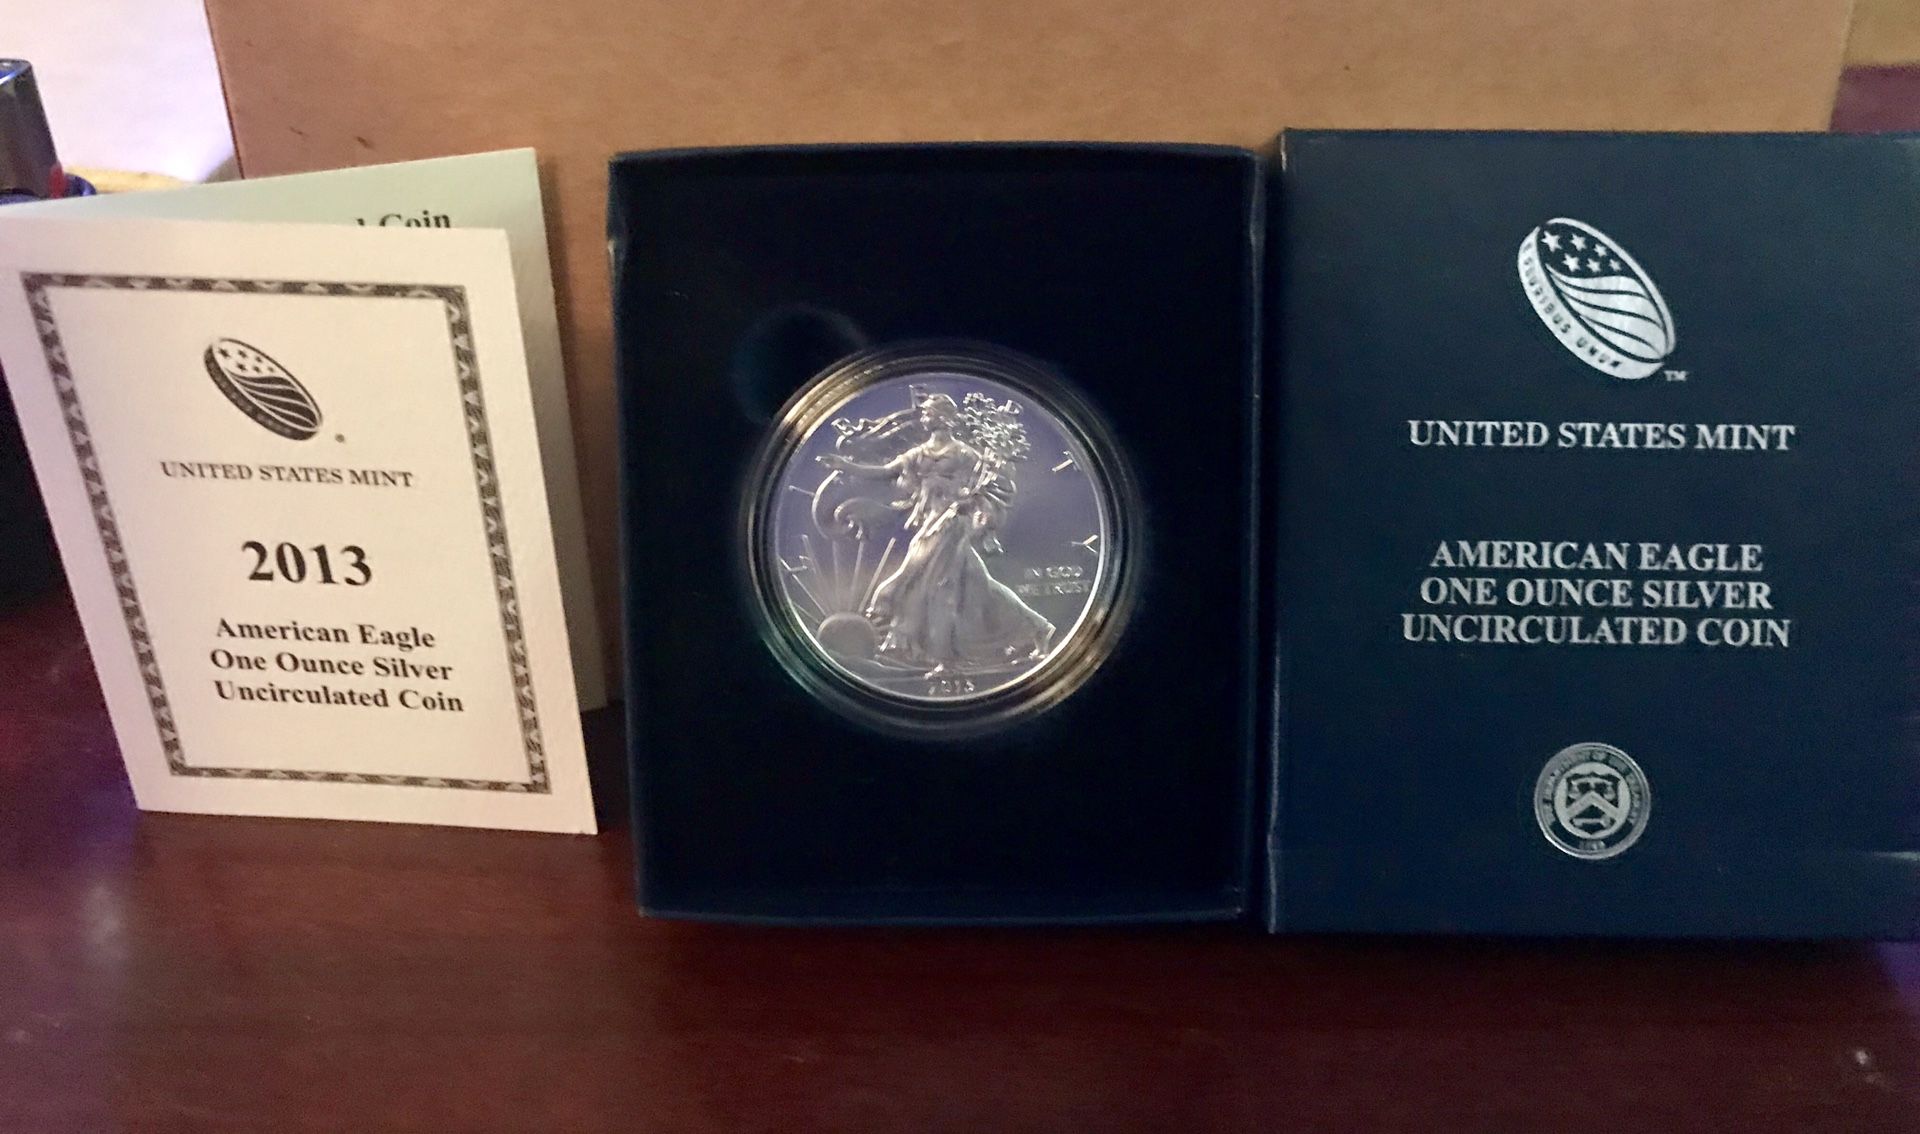 MINT 2013 American Eagle One Ounce Silver Dollar Uncirculated Coin